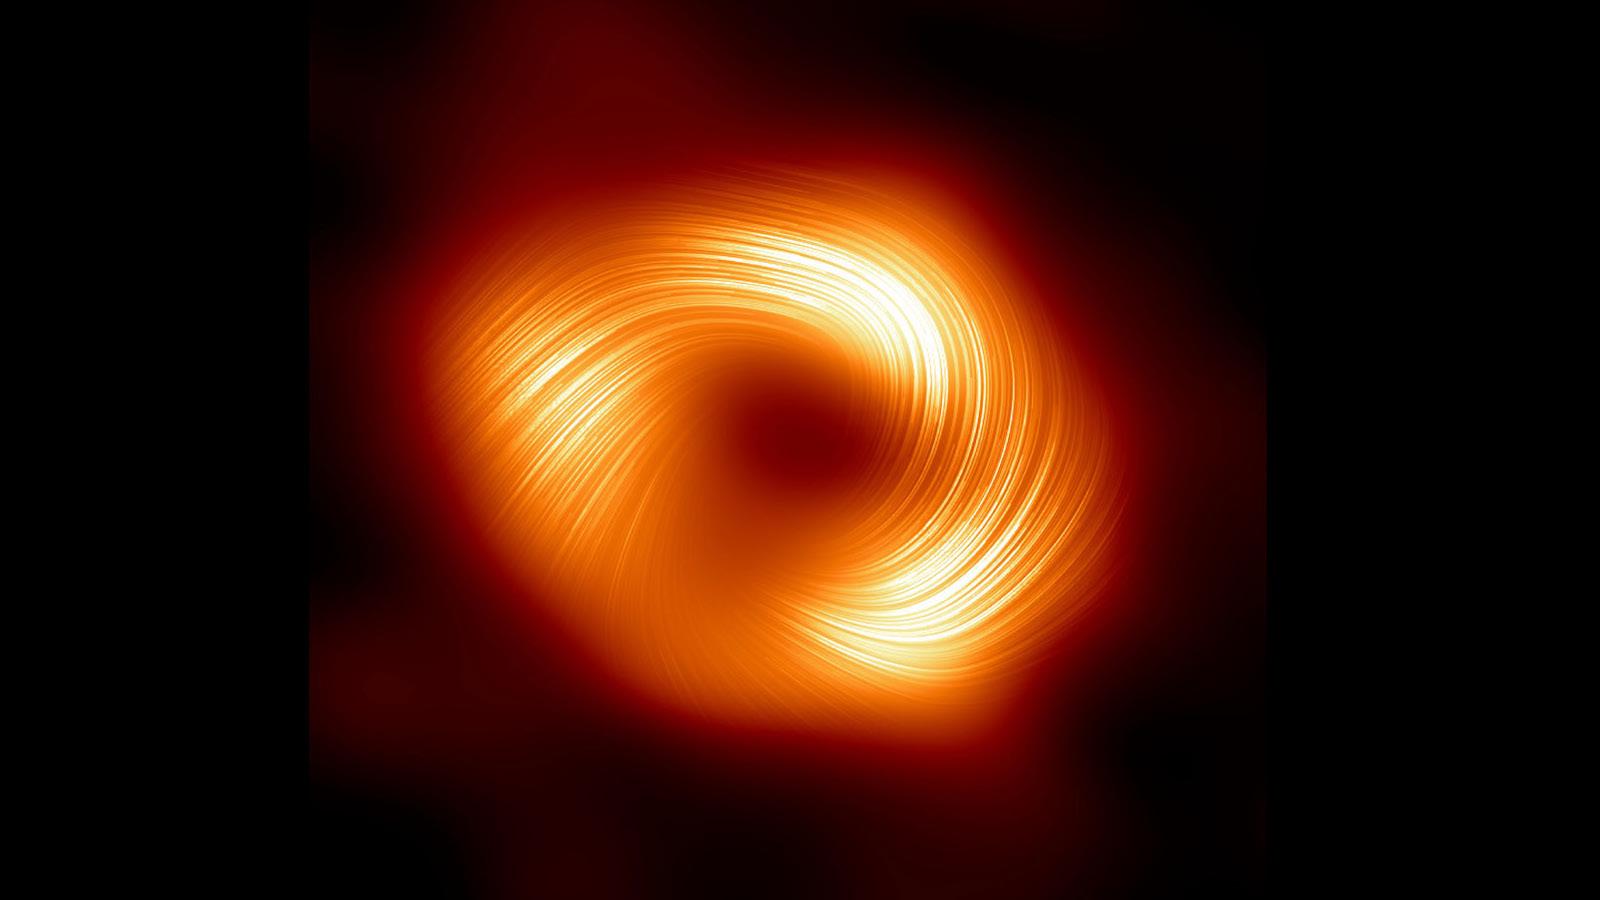 glowing gas with swirling lines representing polarized light surrounds the shadow of the Milky Way's supermassive black hole